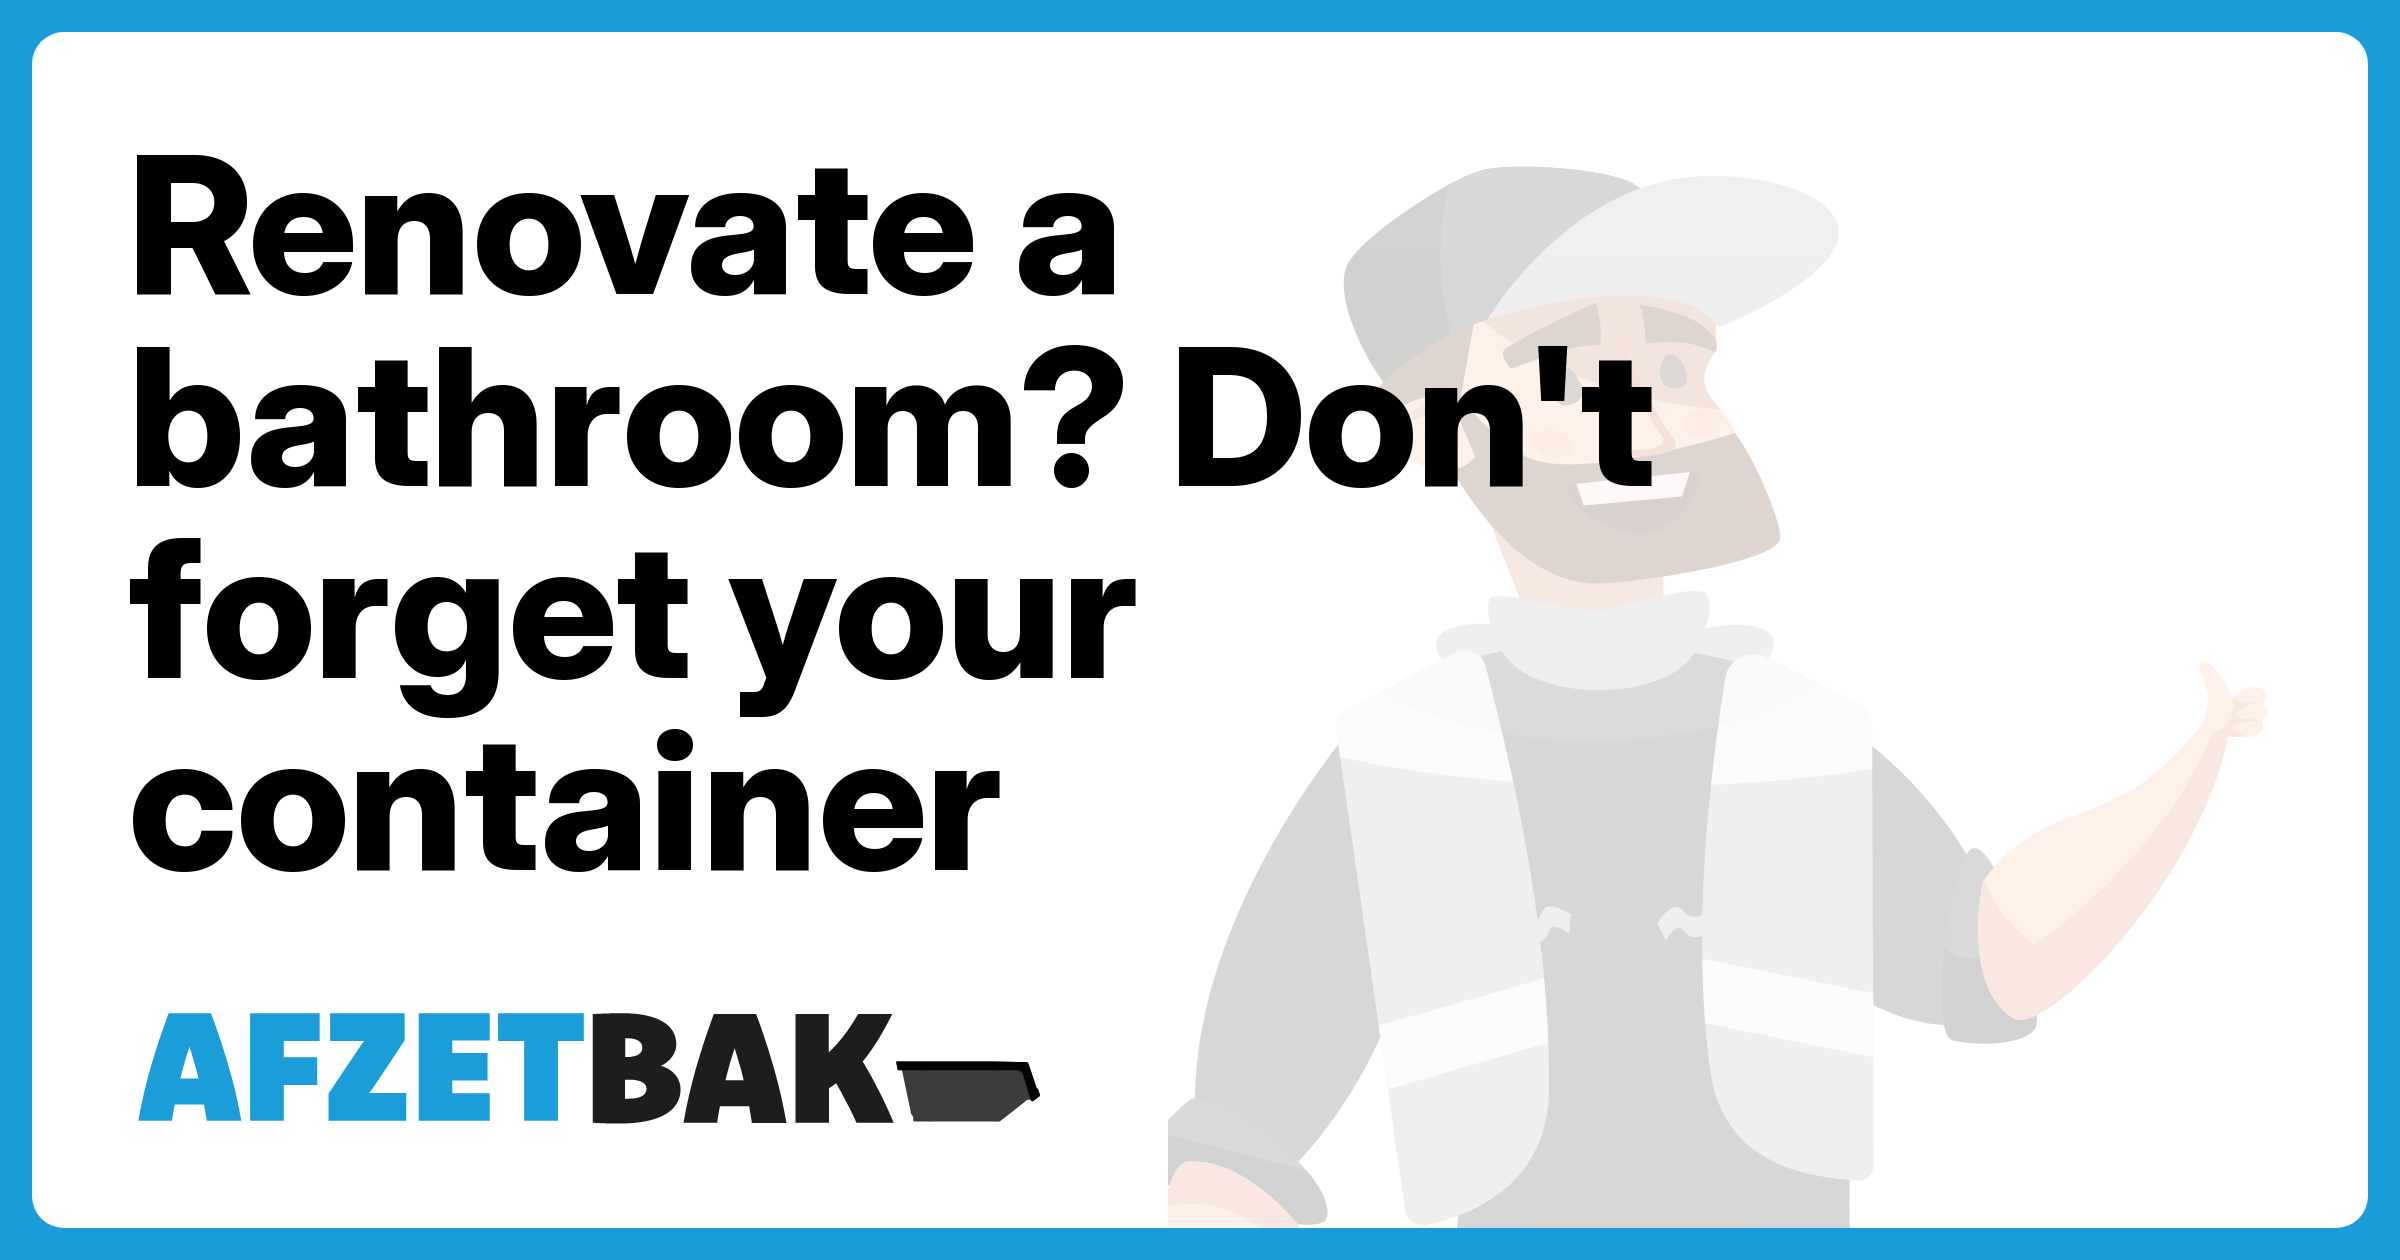 Renovate a bathroom? Don't forget your container - Afzetbak.nl